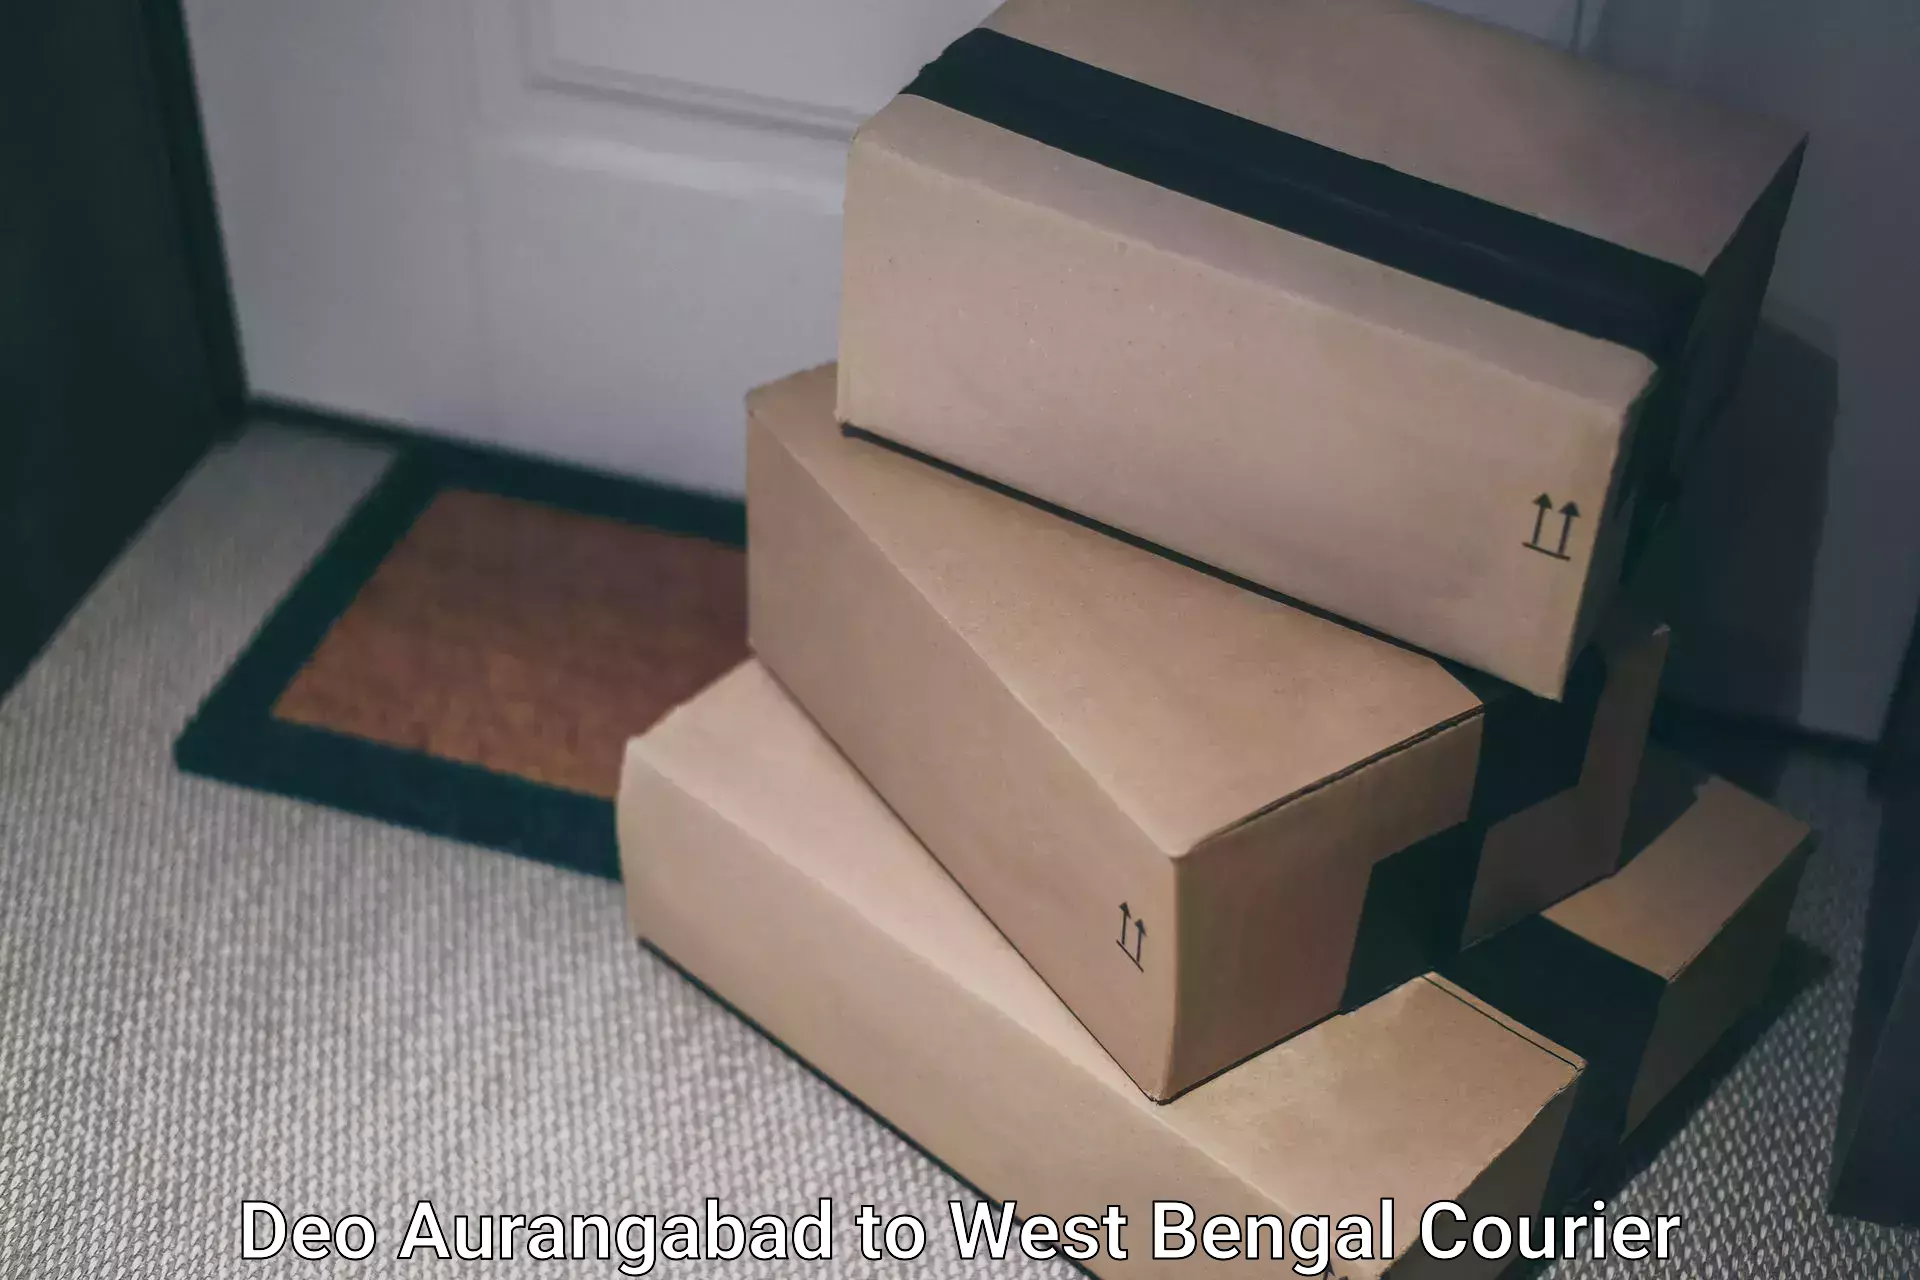 Quality courier services Deo Aurangabad to Mohammad Bazar